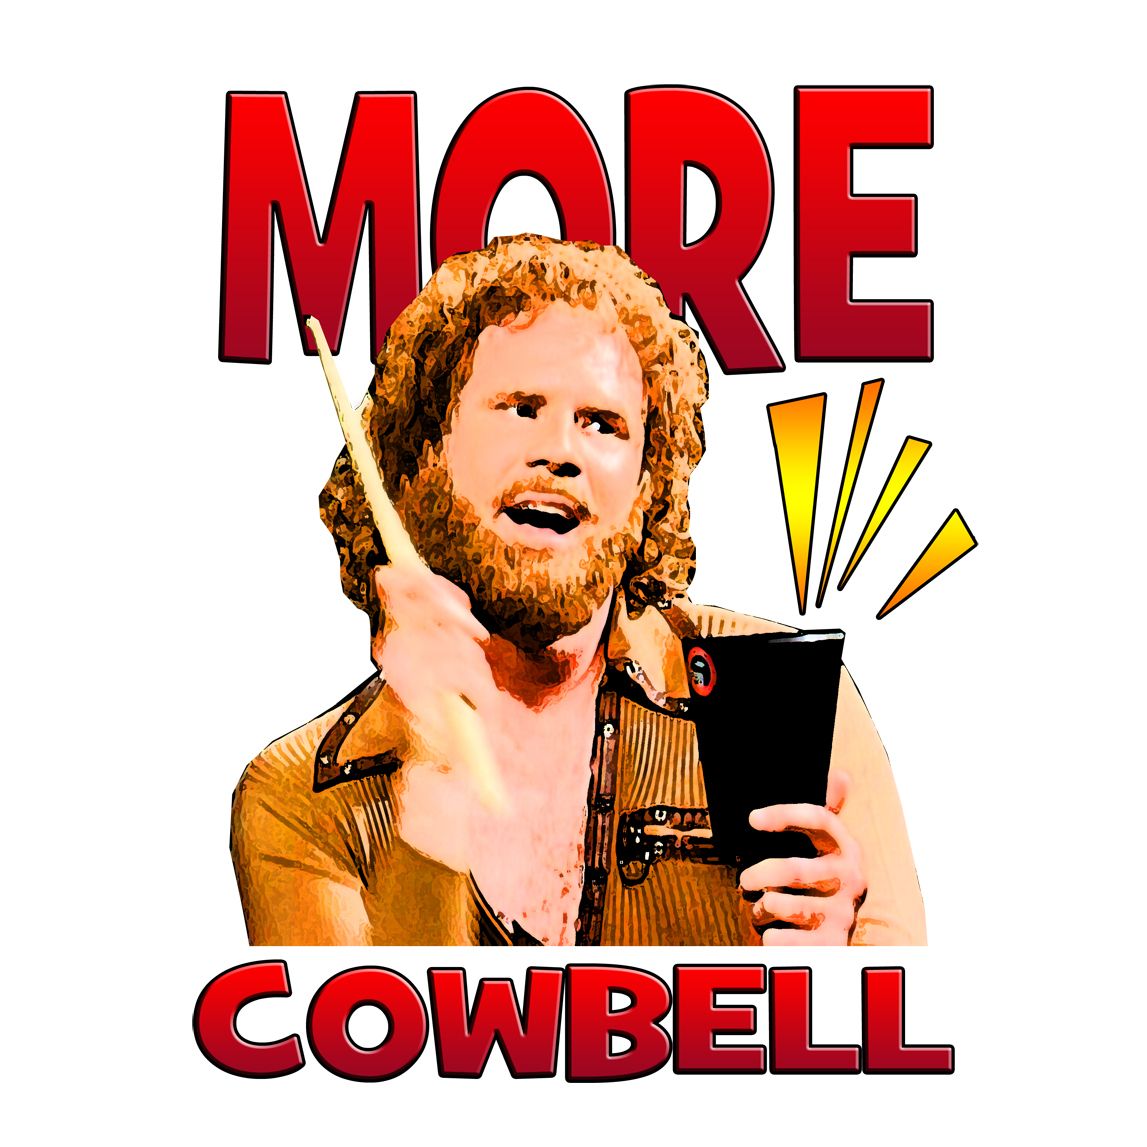 More Cowbell Funny Will Ferrell SNL T Shirt Tee T Shirt